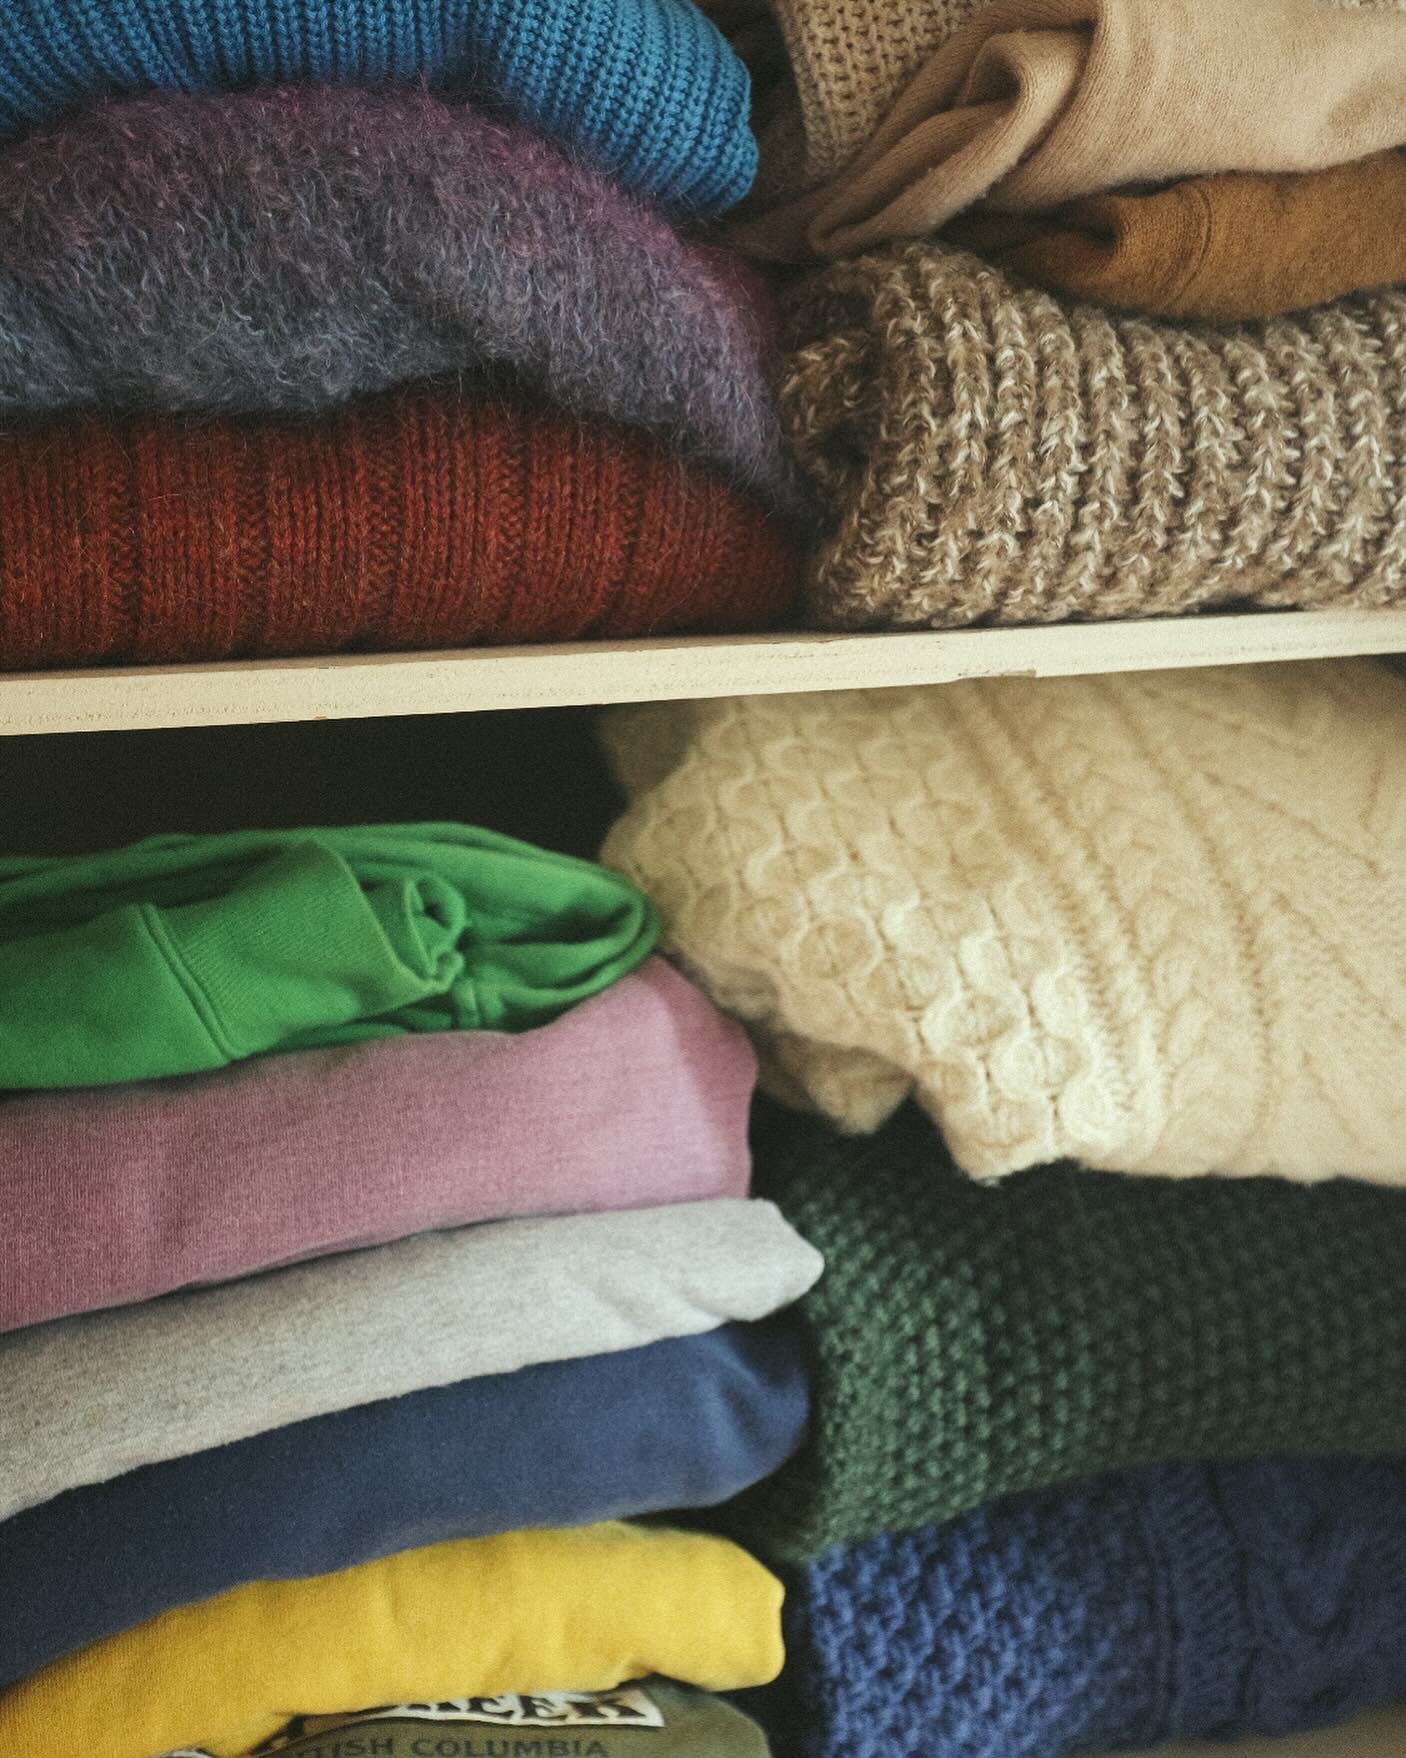 If you haven&rsquo;t done so already. Now is the time to store away those winter knits, heavy jackets and big boots! In the Pacific Northwest we benefit from having a seasonal closet.

- it creates a rhythm for twice yearly checking in with your clot